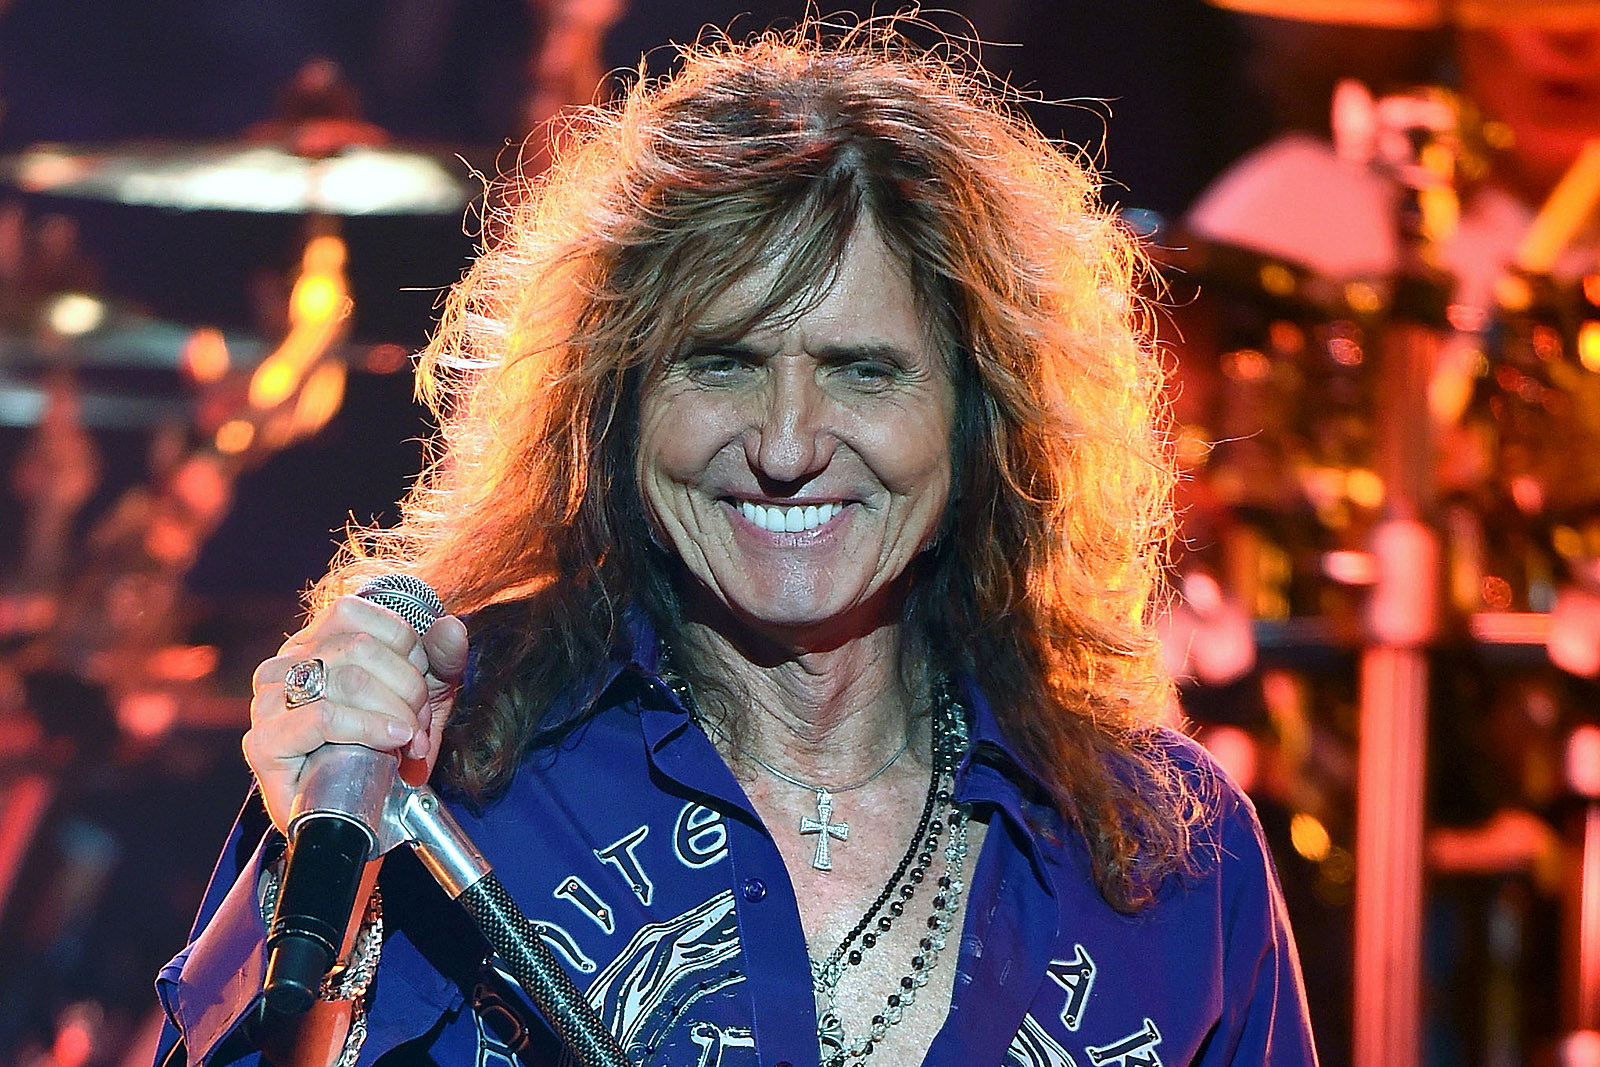 Whitesnake's Next Single to Be Titled 'Shut Up and Kiss Me'